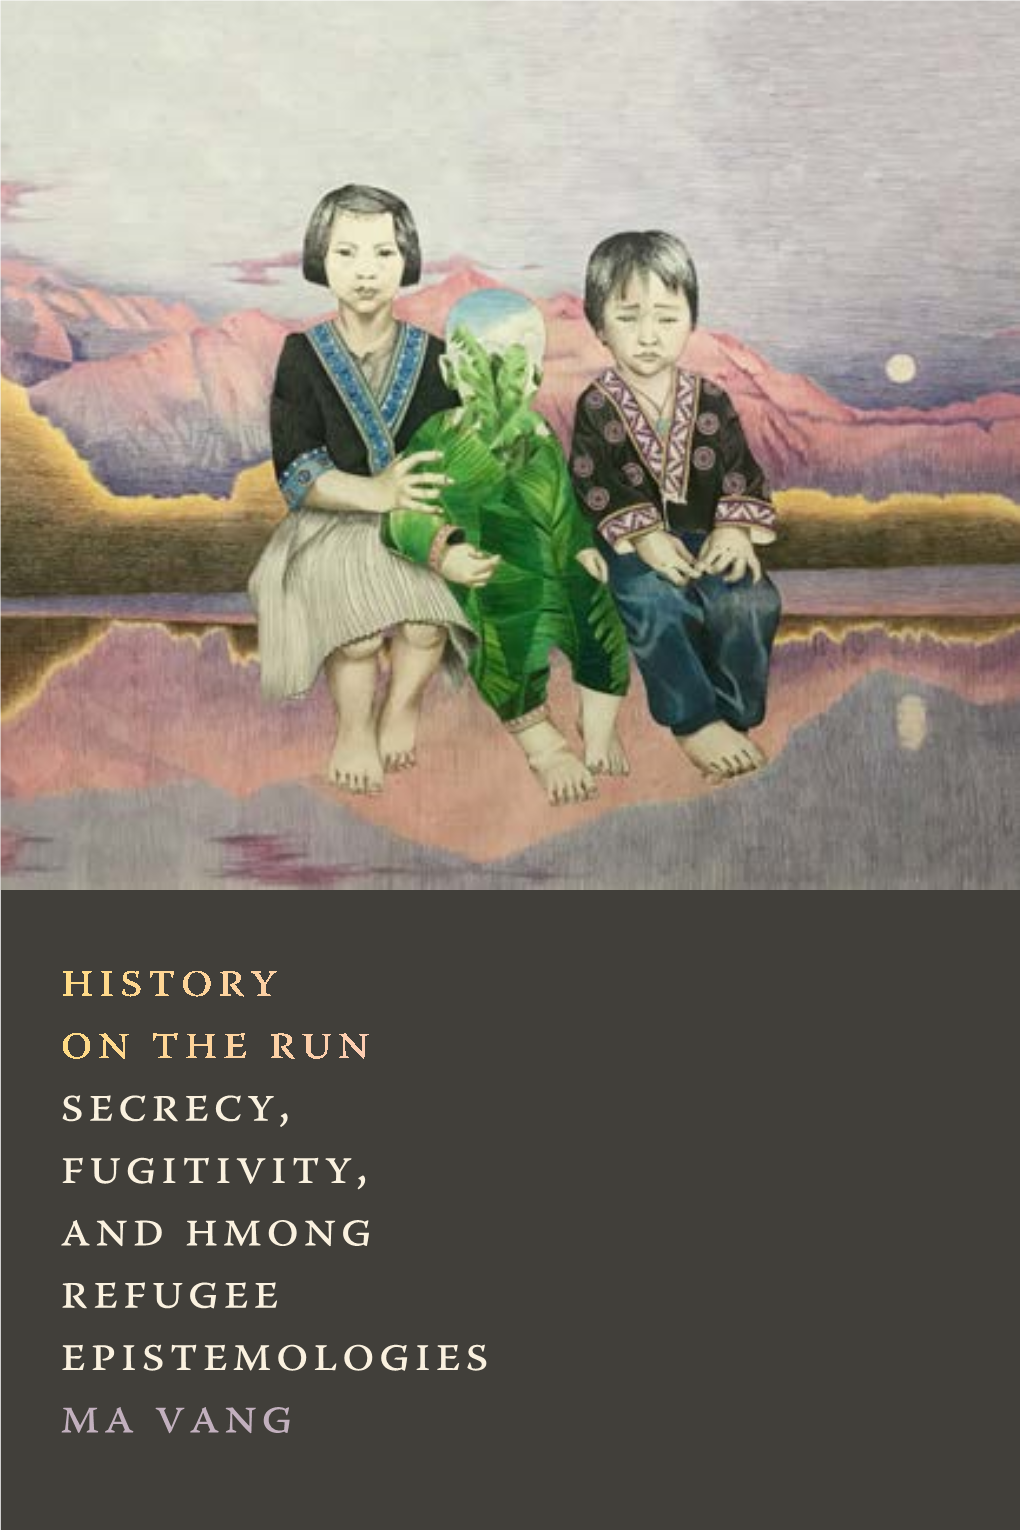 History on the Run Secrecy, Fugitivity, and Hmong Refugee Epistemologies Ma Vang